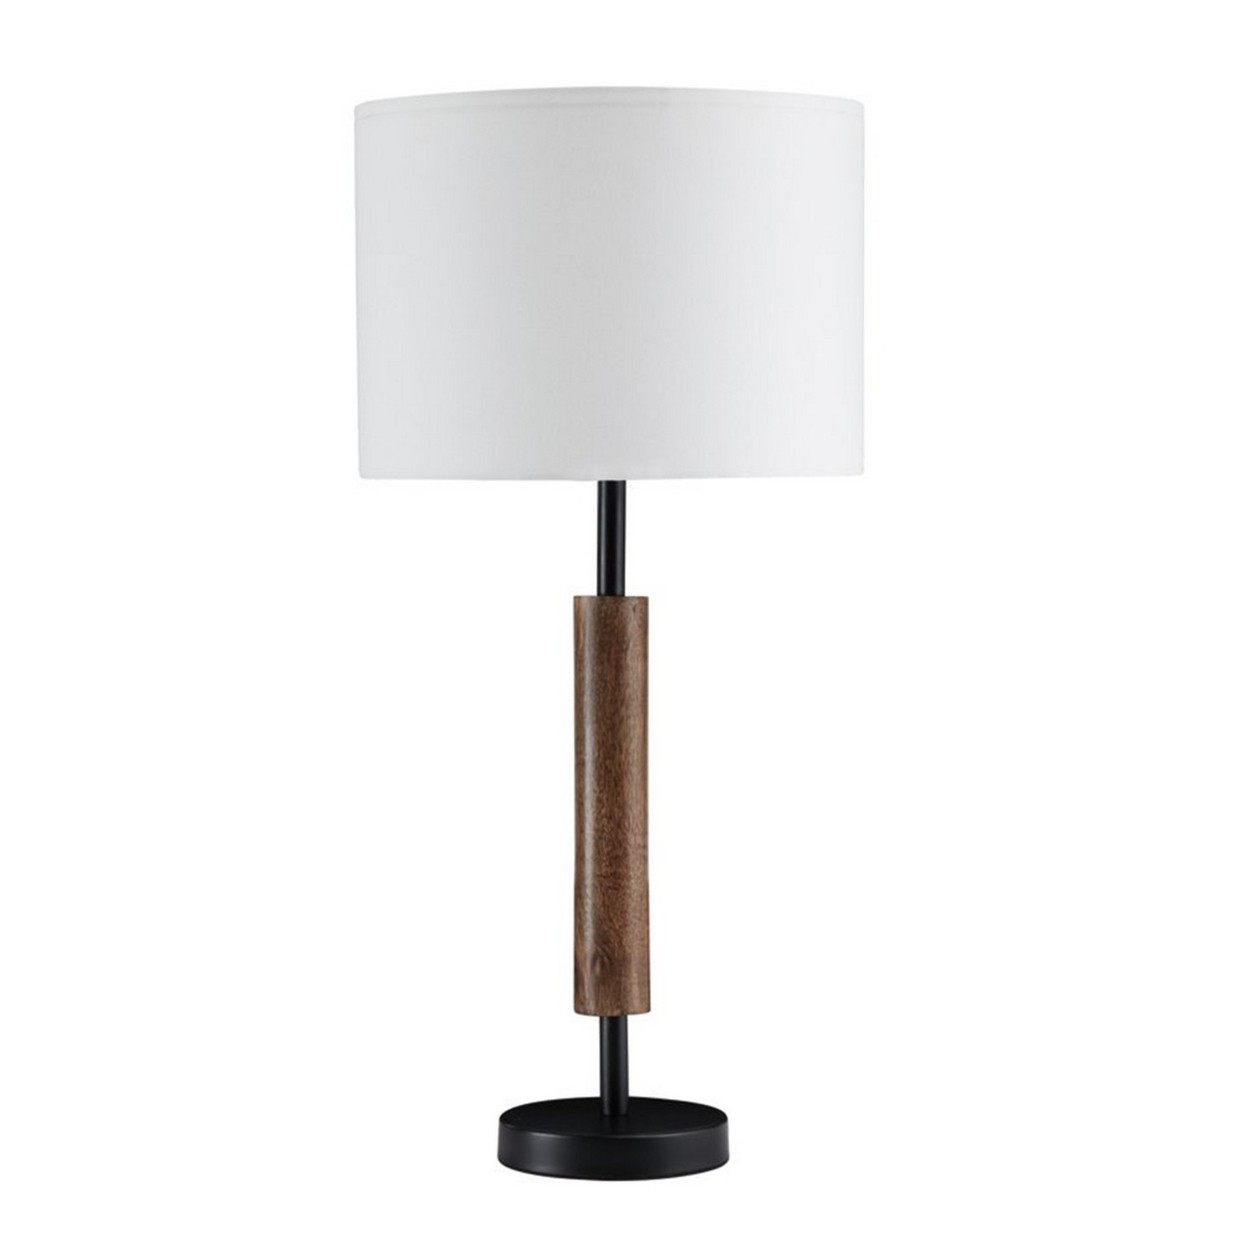 Table Lamp With Rolling Pin Base And Fabric Shade, Set Of 2, White And Brown- Saltoro Sherpi